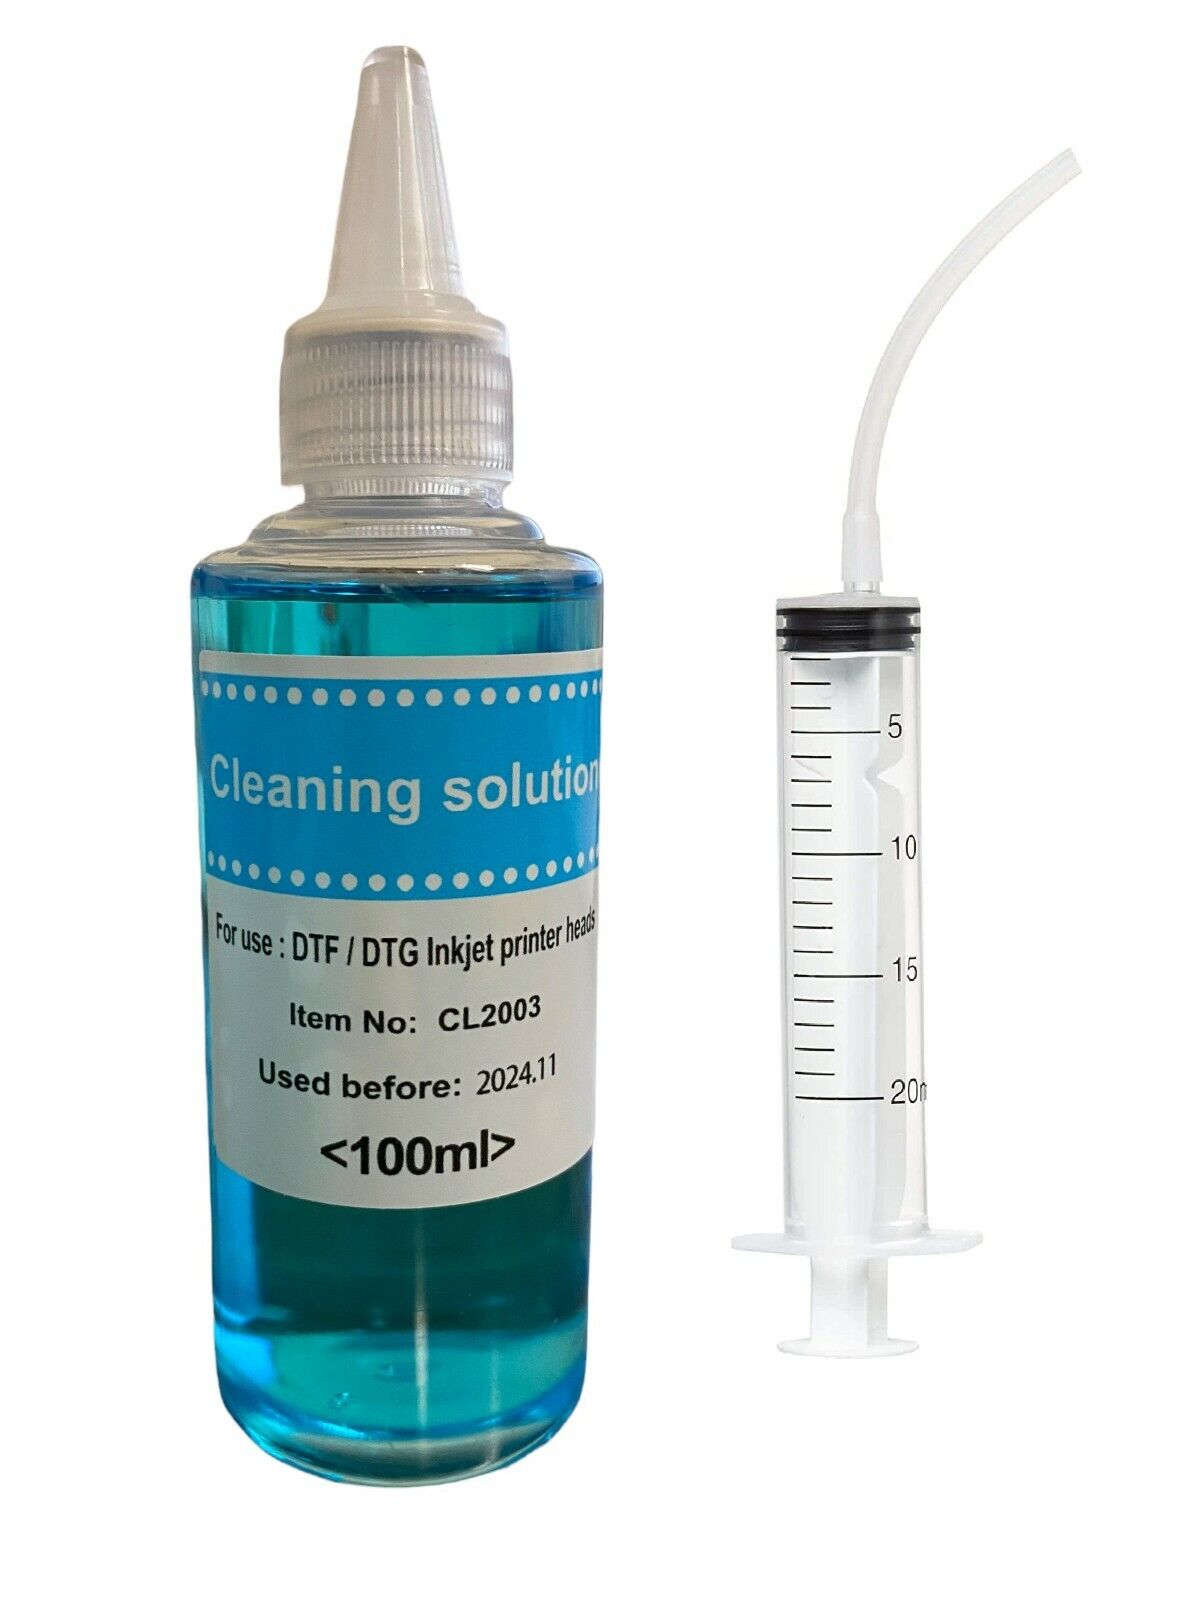 Cleaning Solution Cleaning Fluid Printhead Cleaner Unclog for DTF DTG Printers